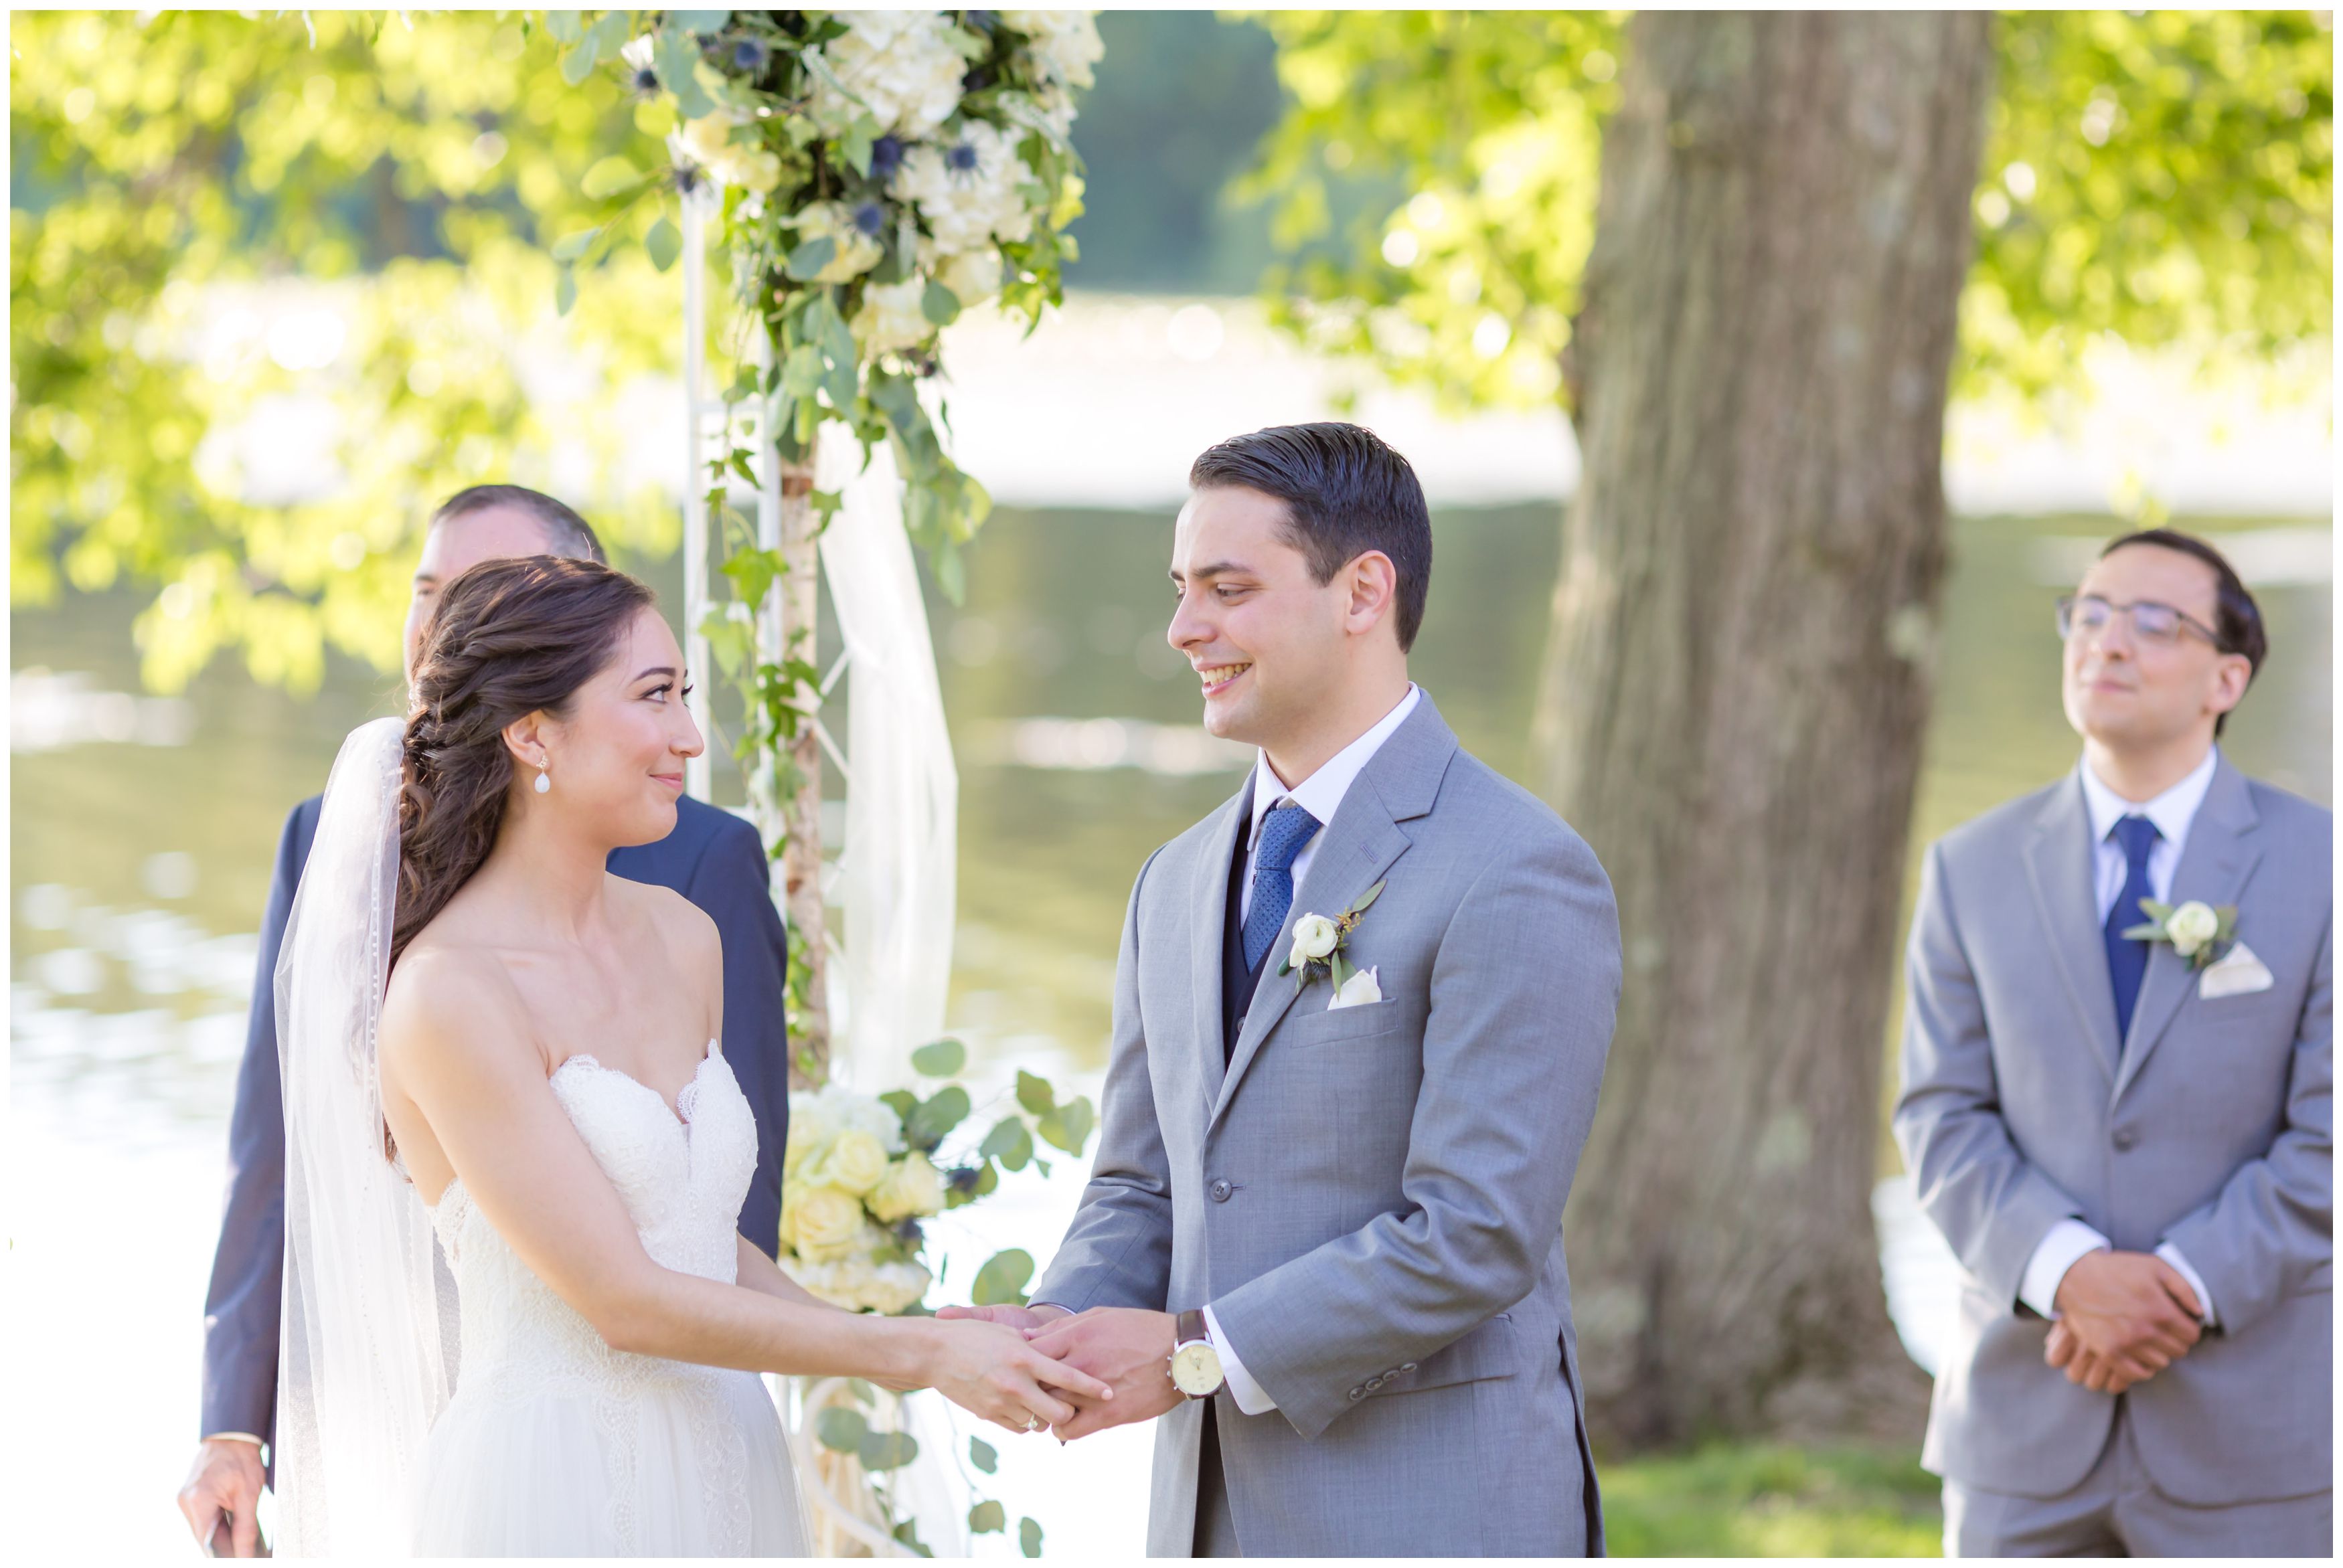 Bride and groom happy at outdoor lakeside ceremony